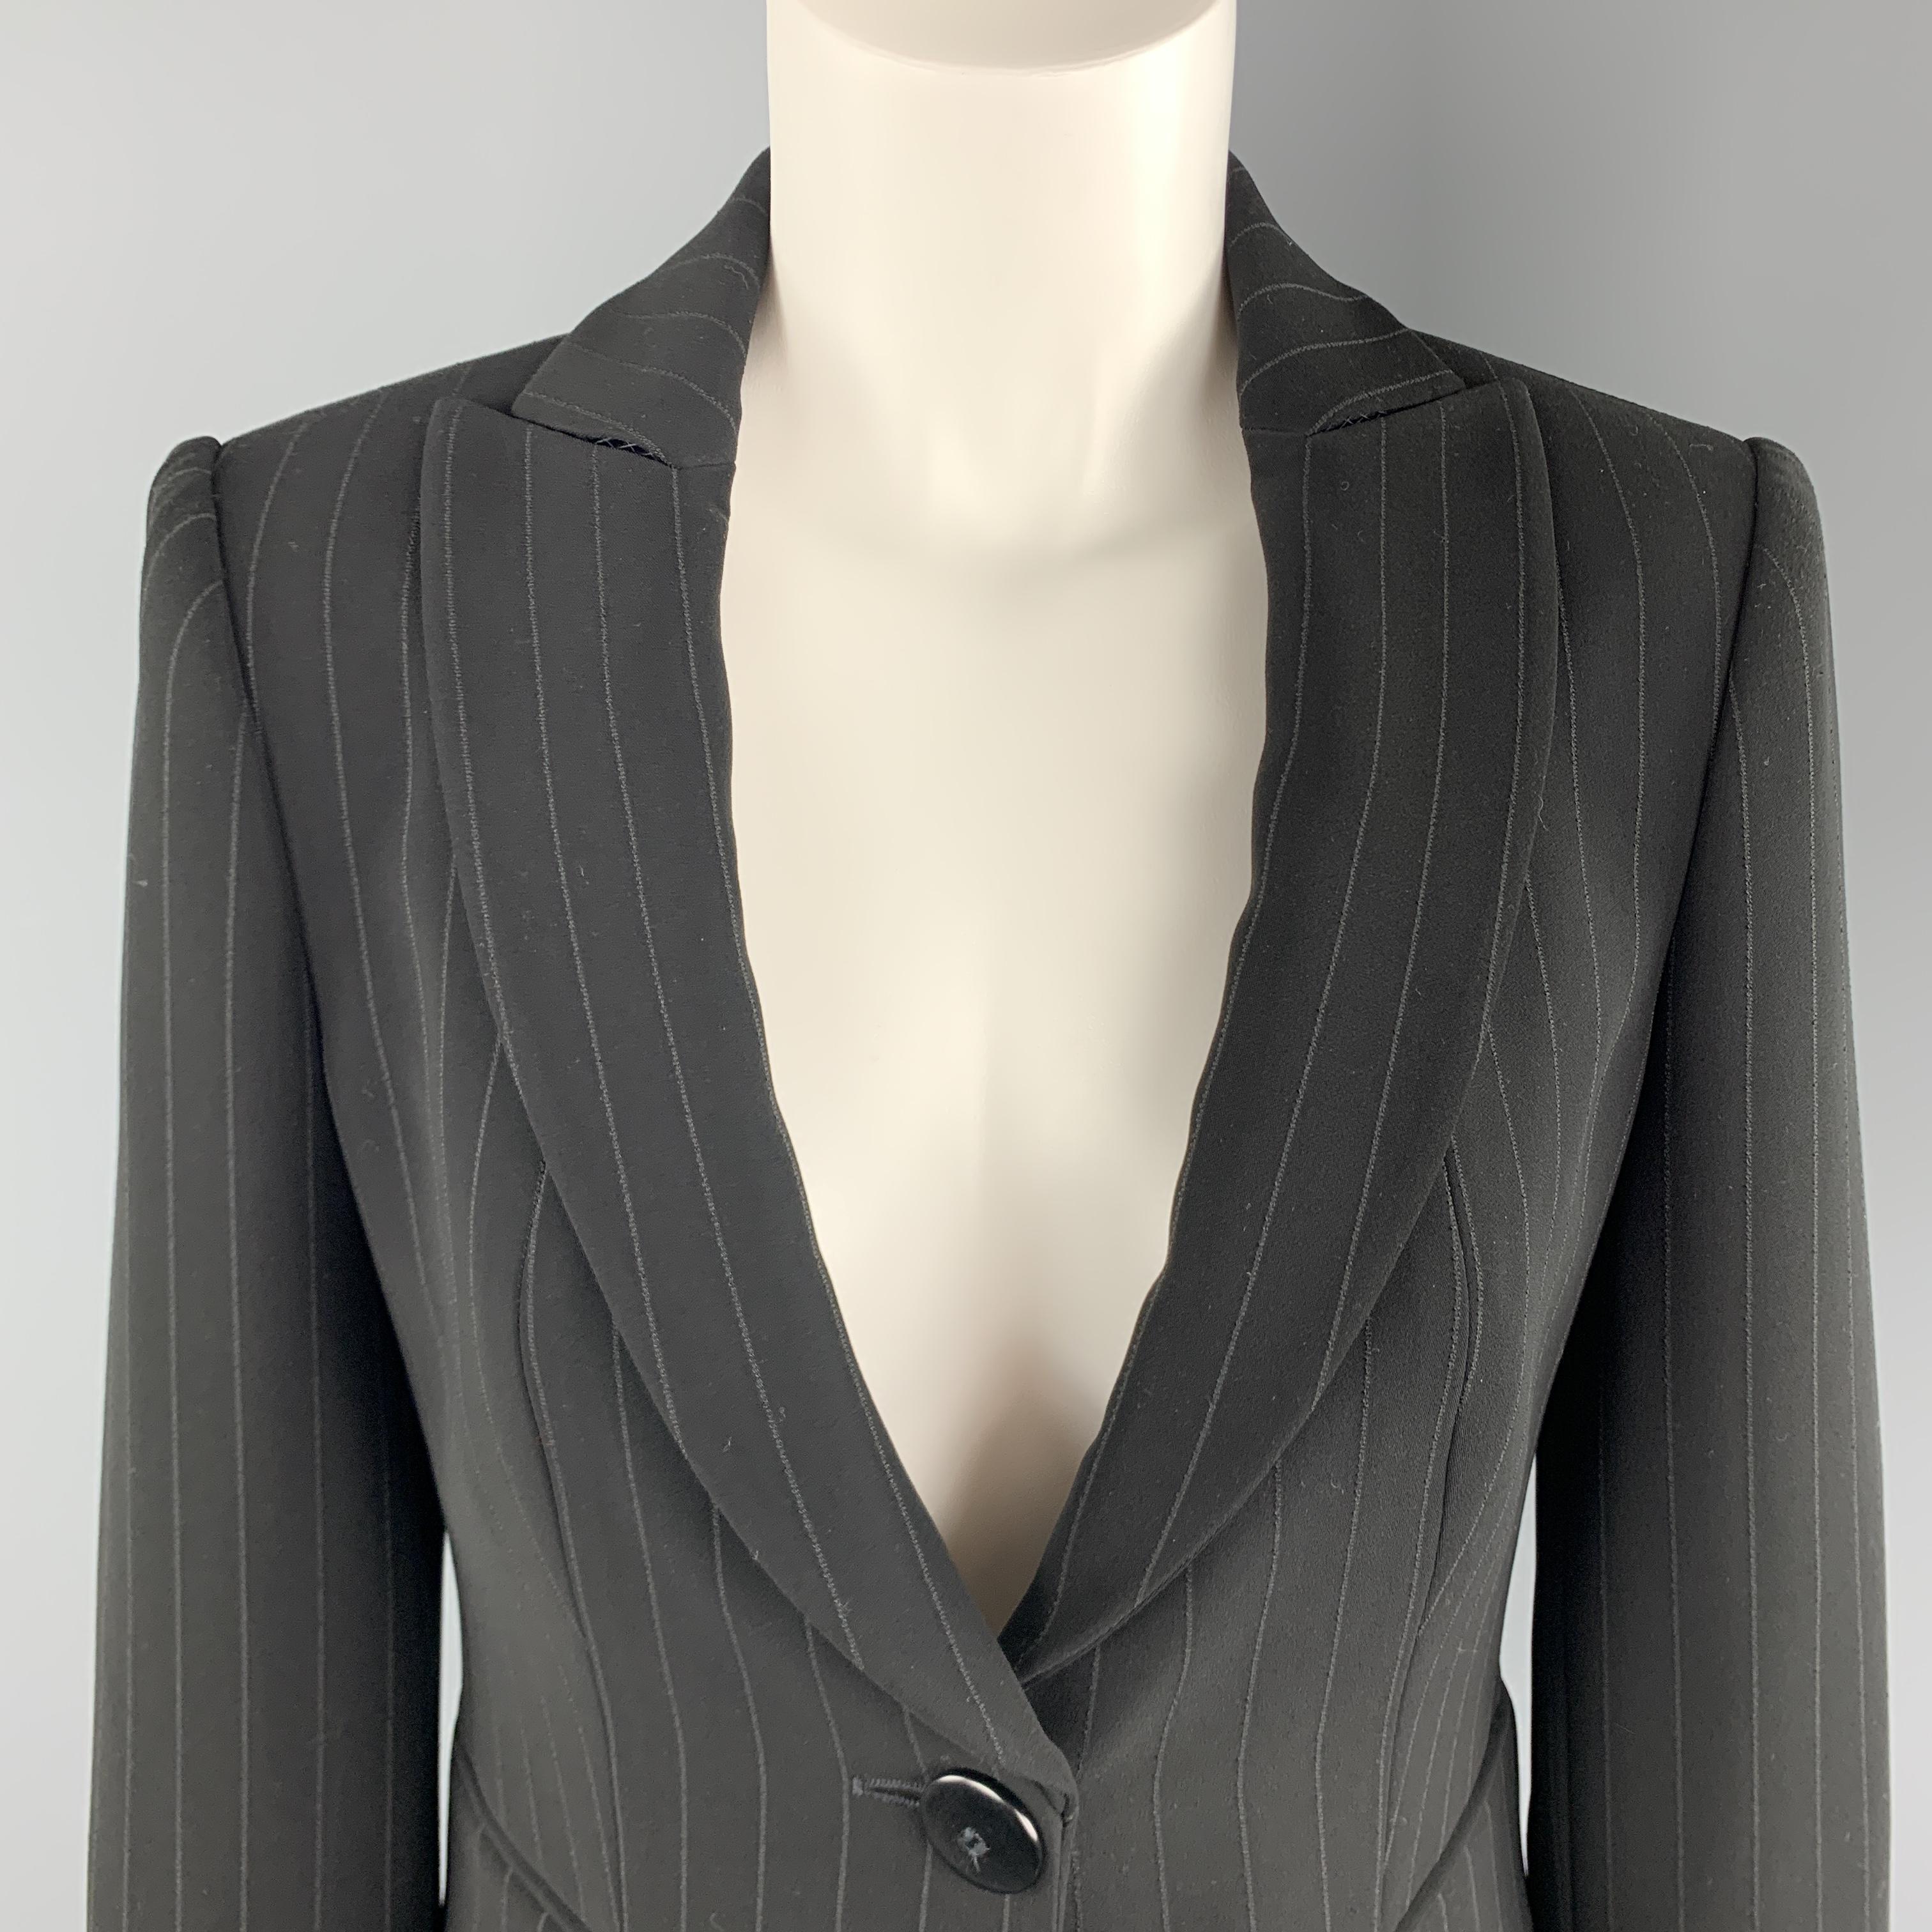 ARMANI COLLEZIONI blazer comes in pinstriped twill with a peak lapel, and single button front. Made in Italy.

Excellent Pre-Owned Condition.
Marked: 4

Measurements:

Shoulder: 15 in.
Bust: 34in.
Sleeve: 24 in.
Length: 24 in.